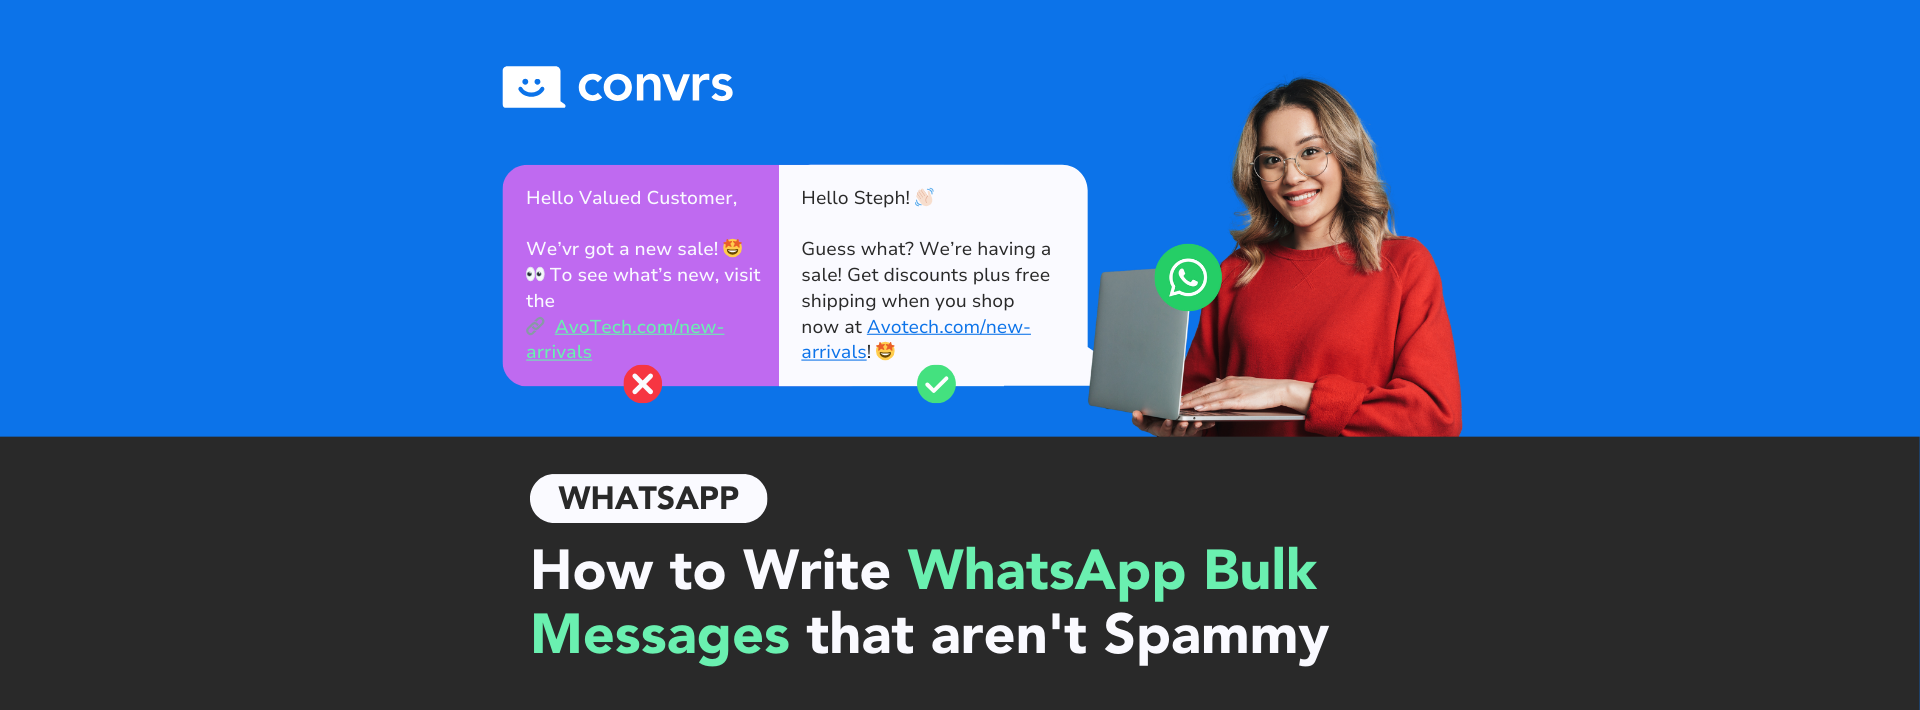 Woman sending bulk messages on WhatsApp with non-spammy messages